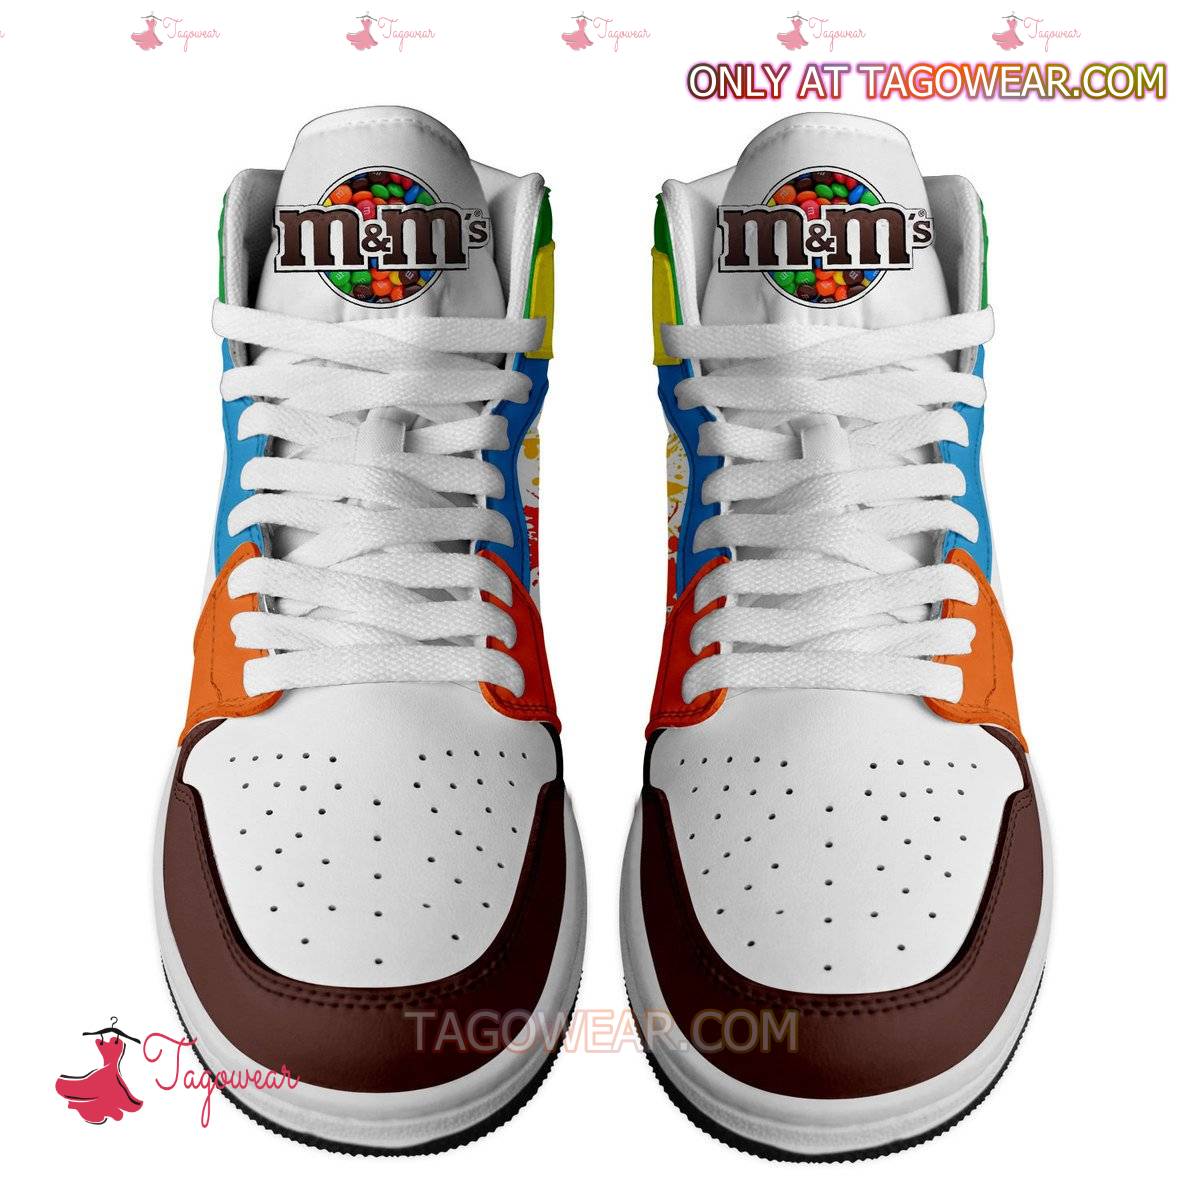 M&m's Melts In Your Mouth Not In Your Hands Air Jordan High Top Shoes a